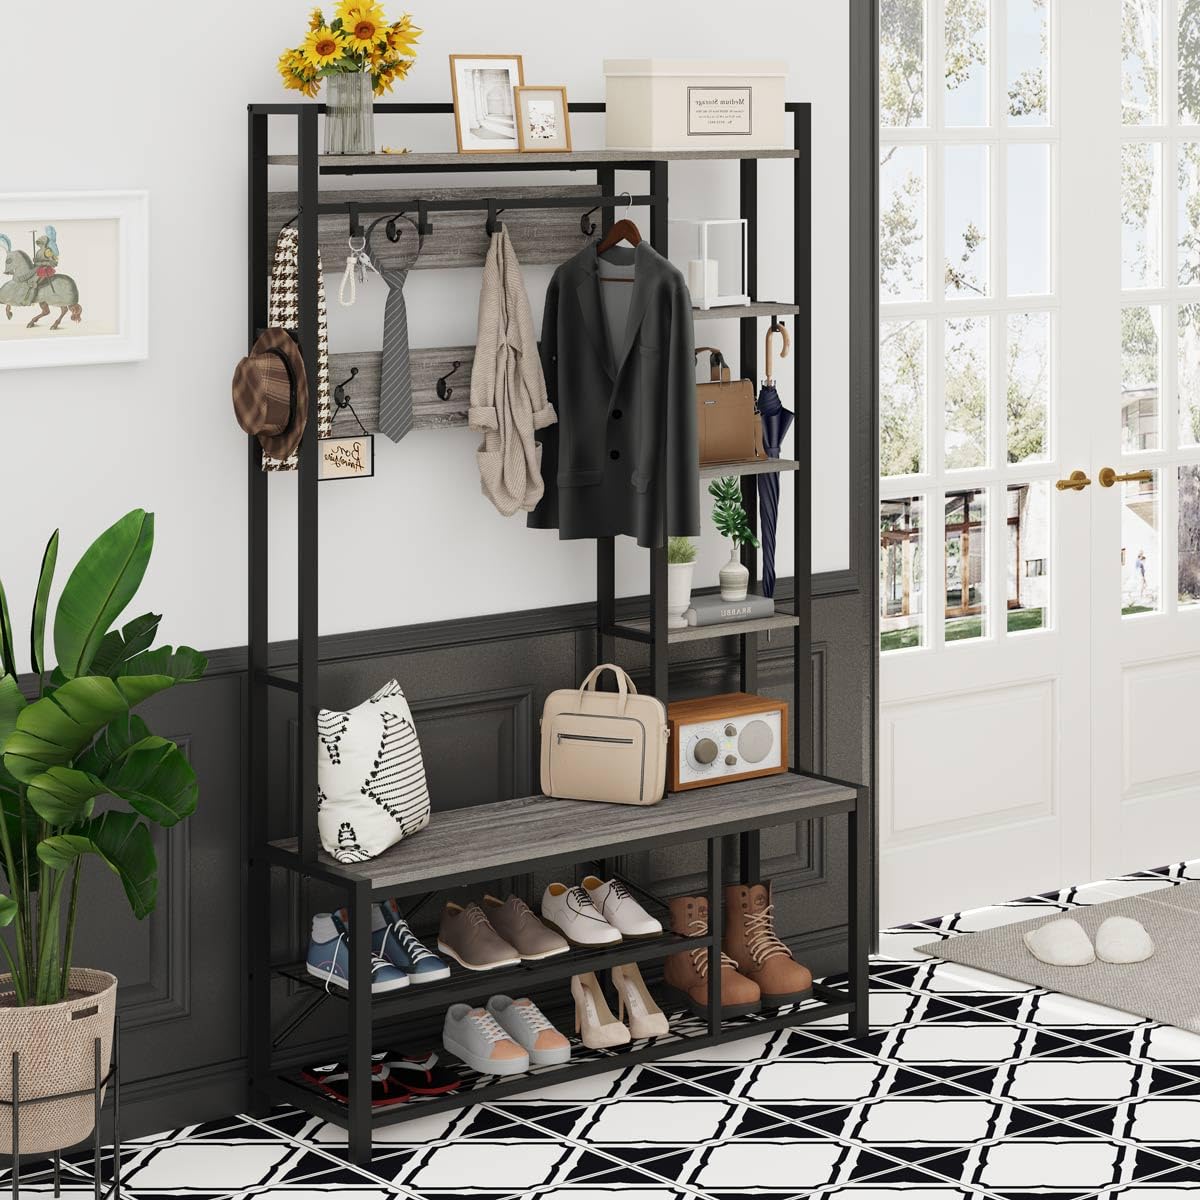 BON AUGURE Industrial Hall Tree with Bench and Shoe Storage, Grey Entryway Bench with Coat Rack, Wooden Metal Coat Tree with Hooks, 5 In 1 Multifunctional Shoe Bench and Wall Rack (Dark Gray Oak)